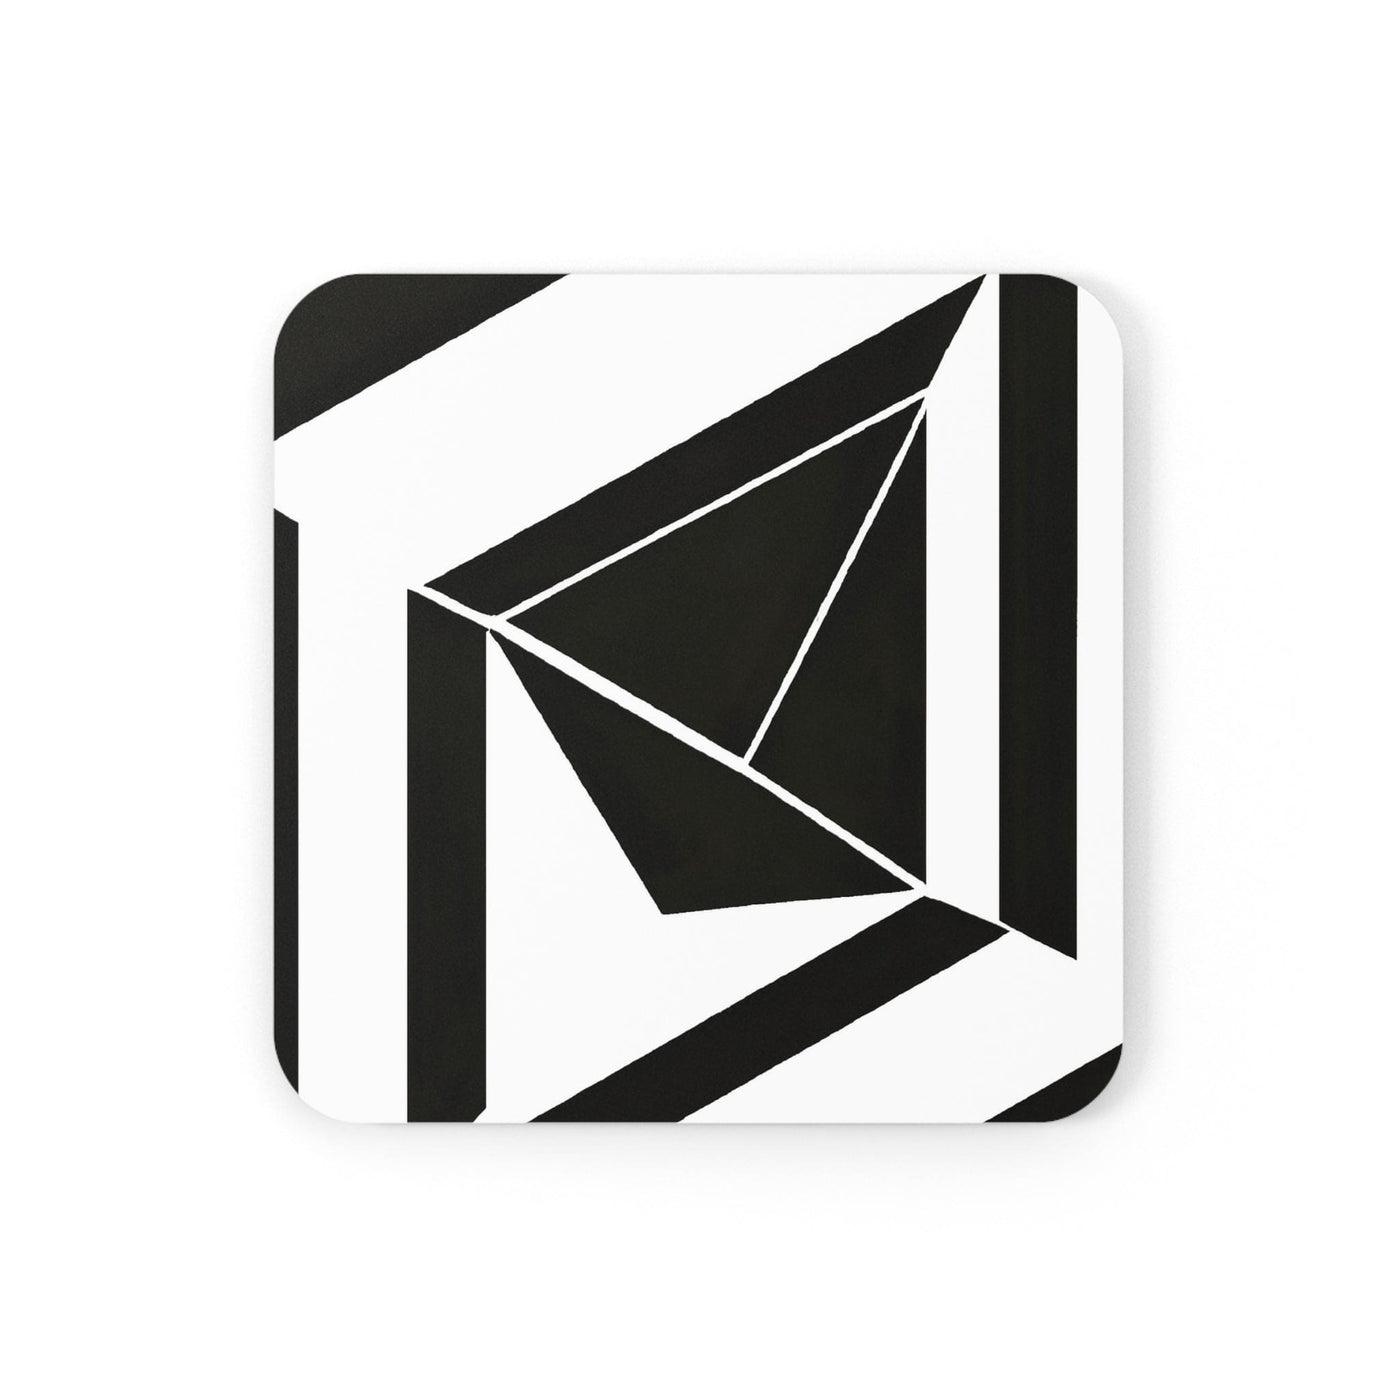 Coaster Set Of 4 For Drinks Black And White Geometric Pattern - Decorative